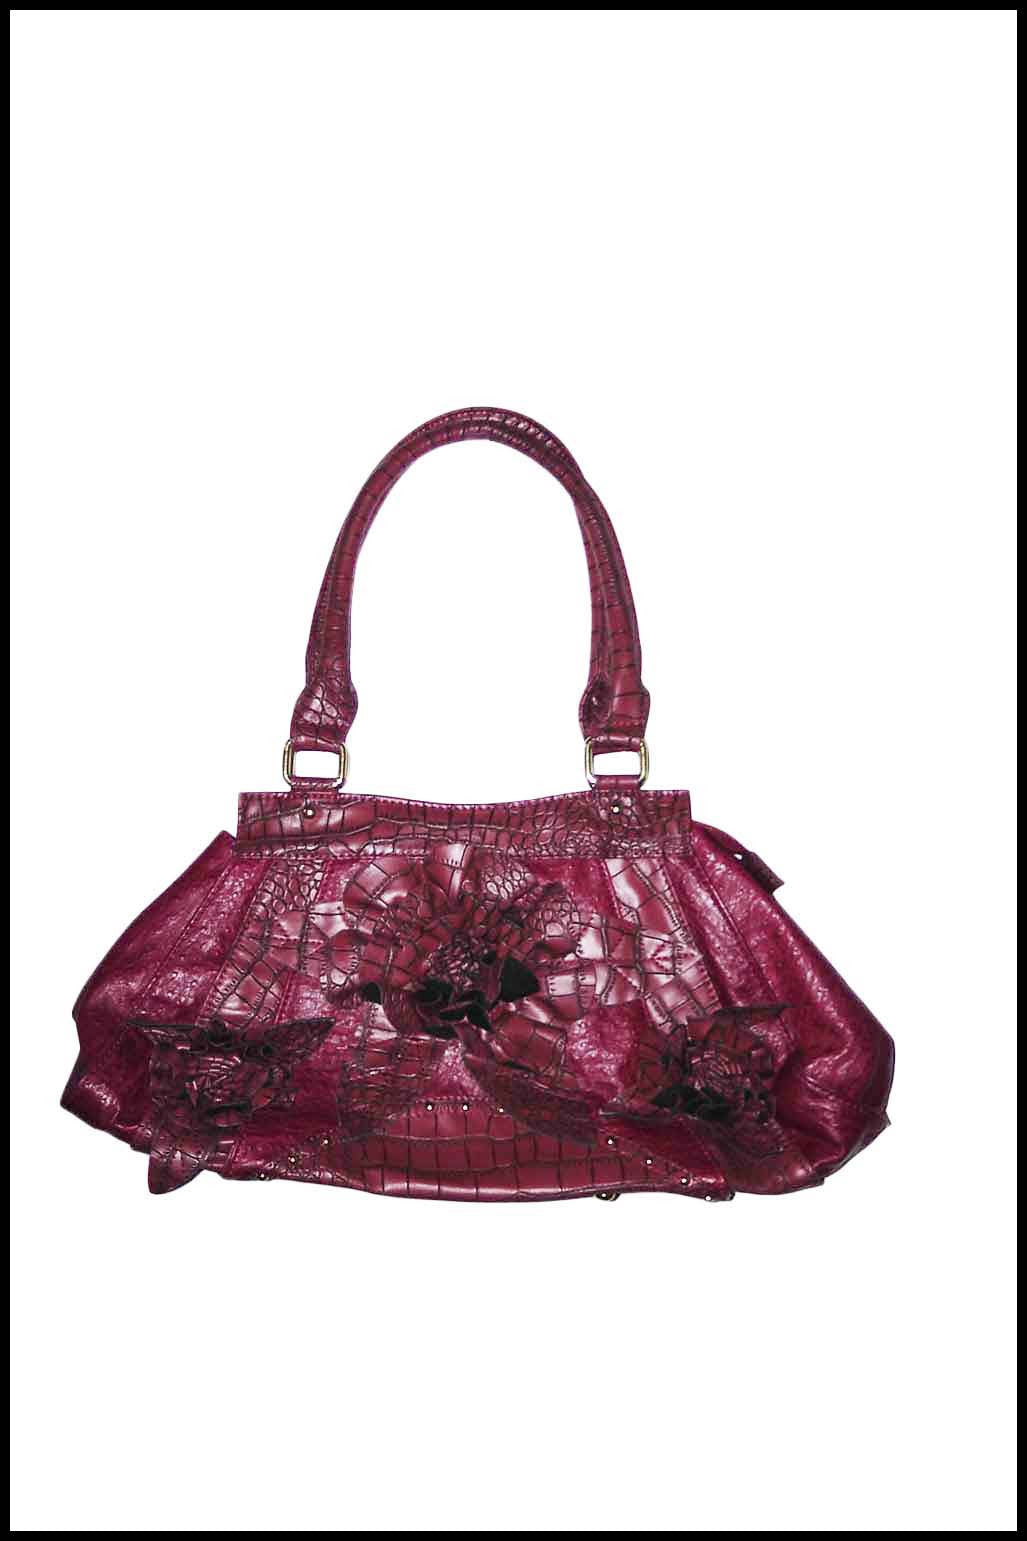 Faux Alligator Handbag with Triple Flower Detailing and Double Handles